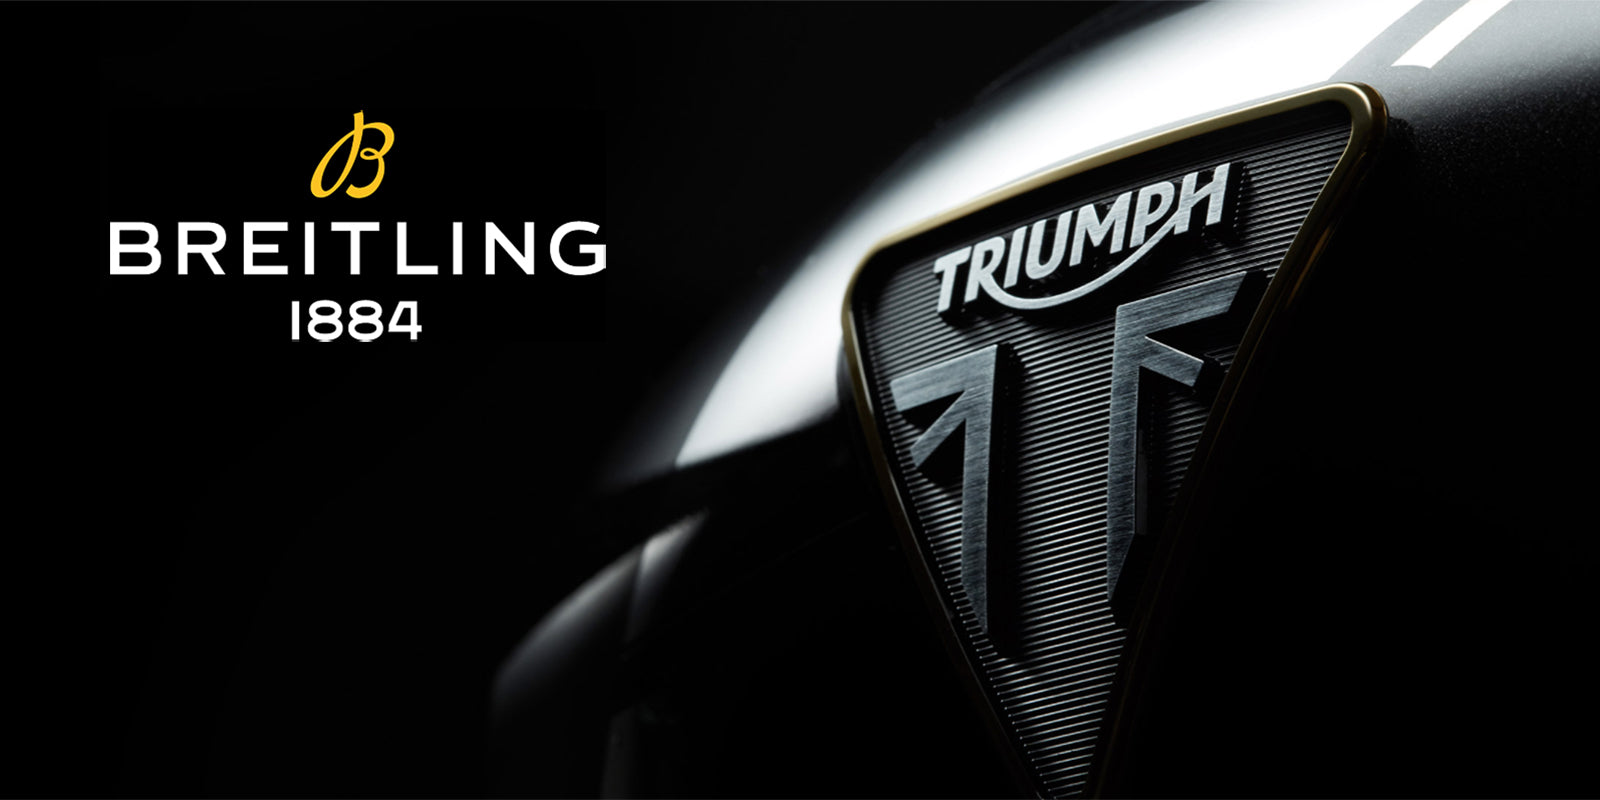 Breitling and Triumph - Exploring New Horizons